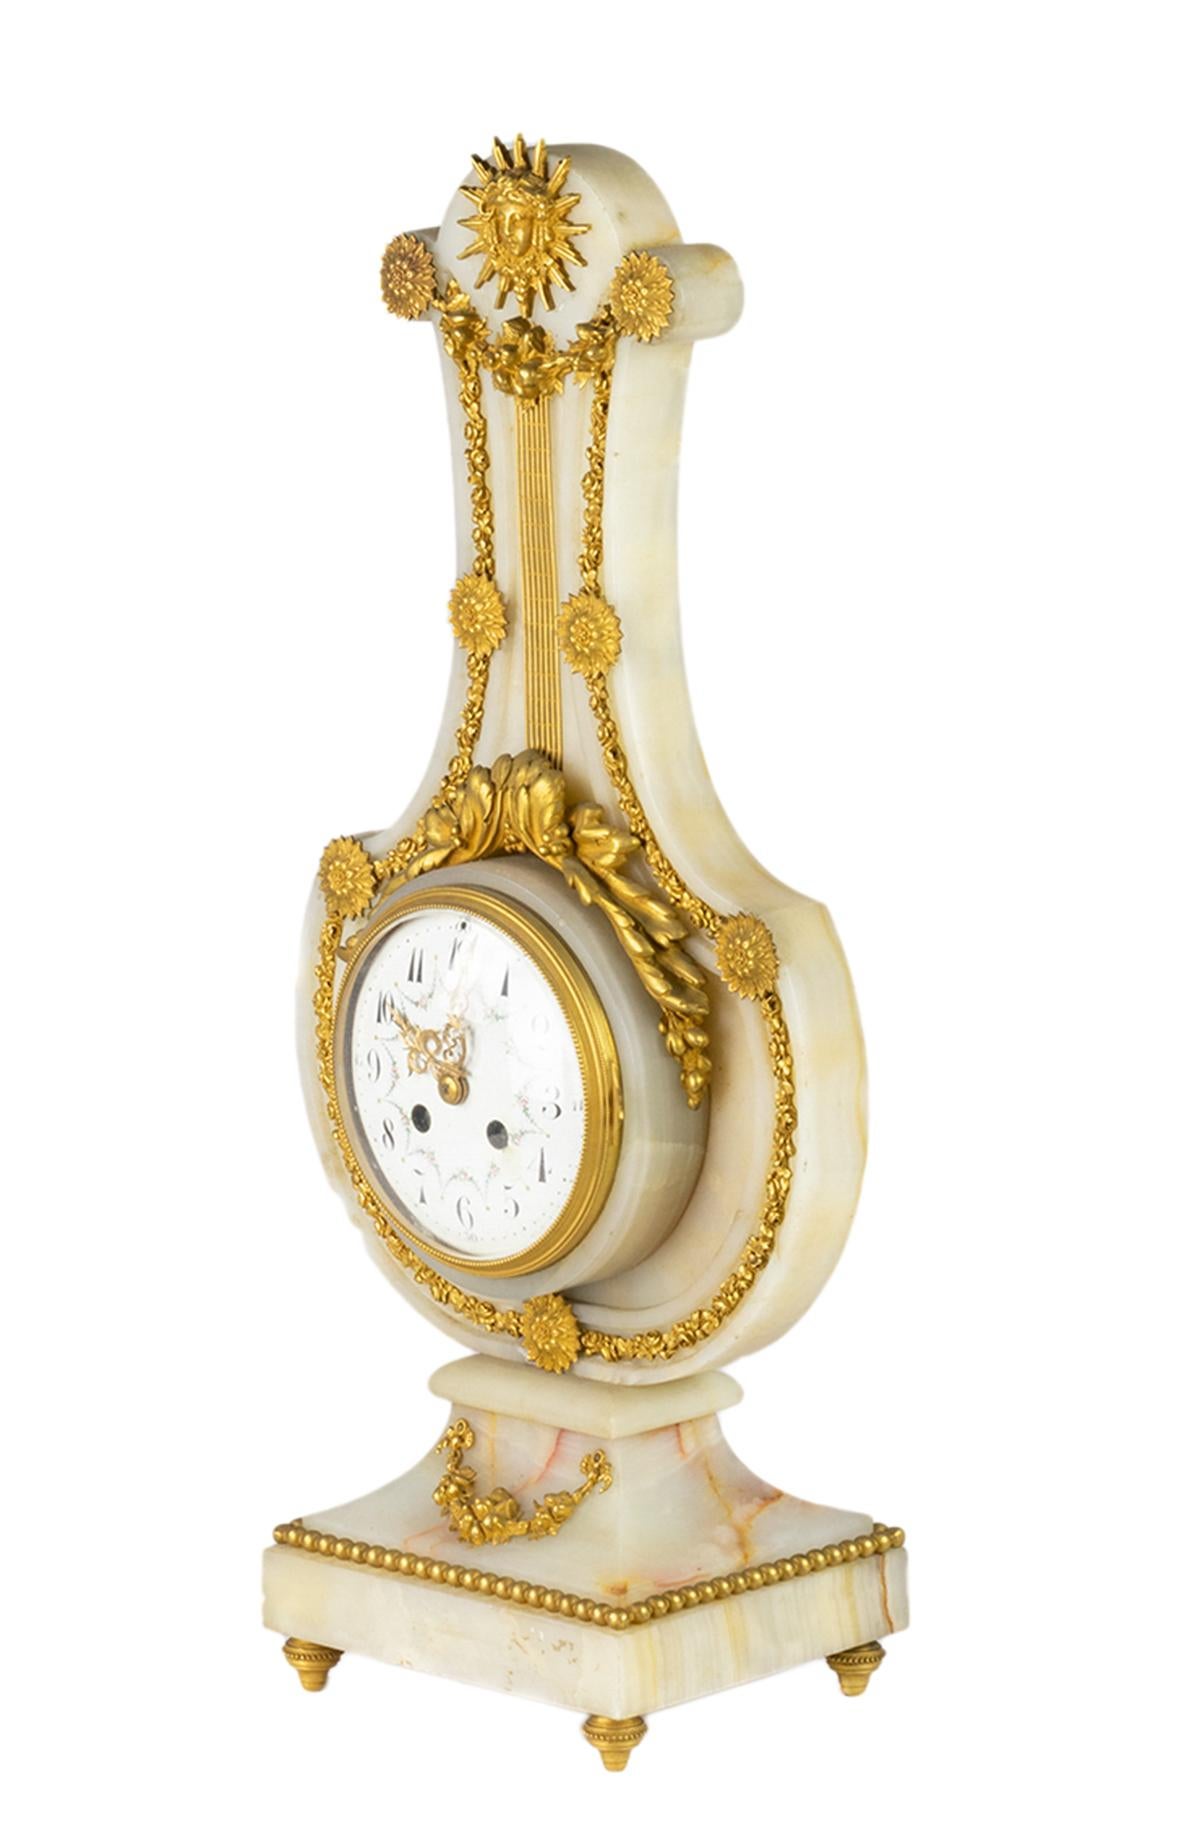 Large Lyre Pendulum clock in white marble, rich ornamentation of very finely chiseled and gilded bronzes such as garlands of flowers, draped garlands, rosettes and acanthus leaves.

The marble Lyre is surmounted by a radiant neoclassical mask from